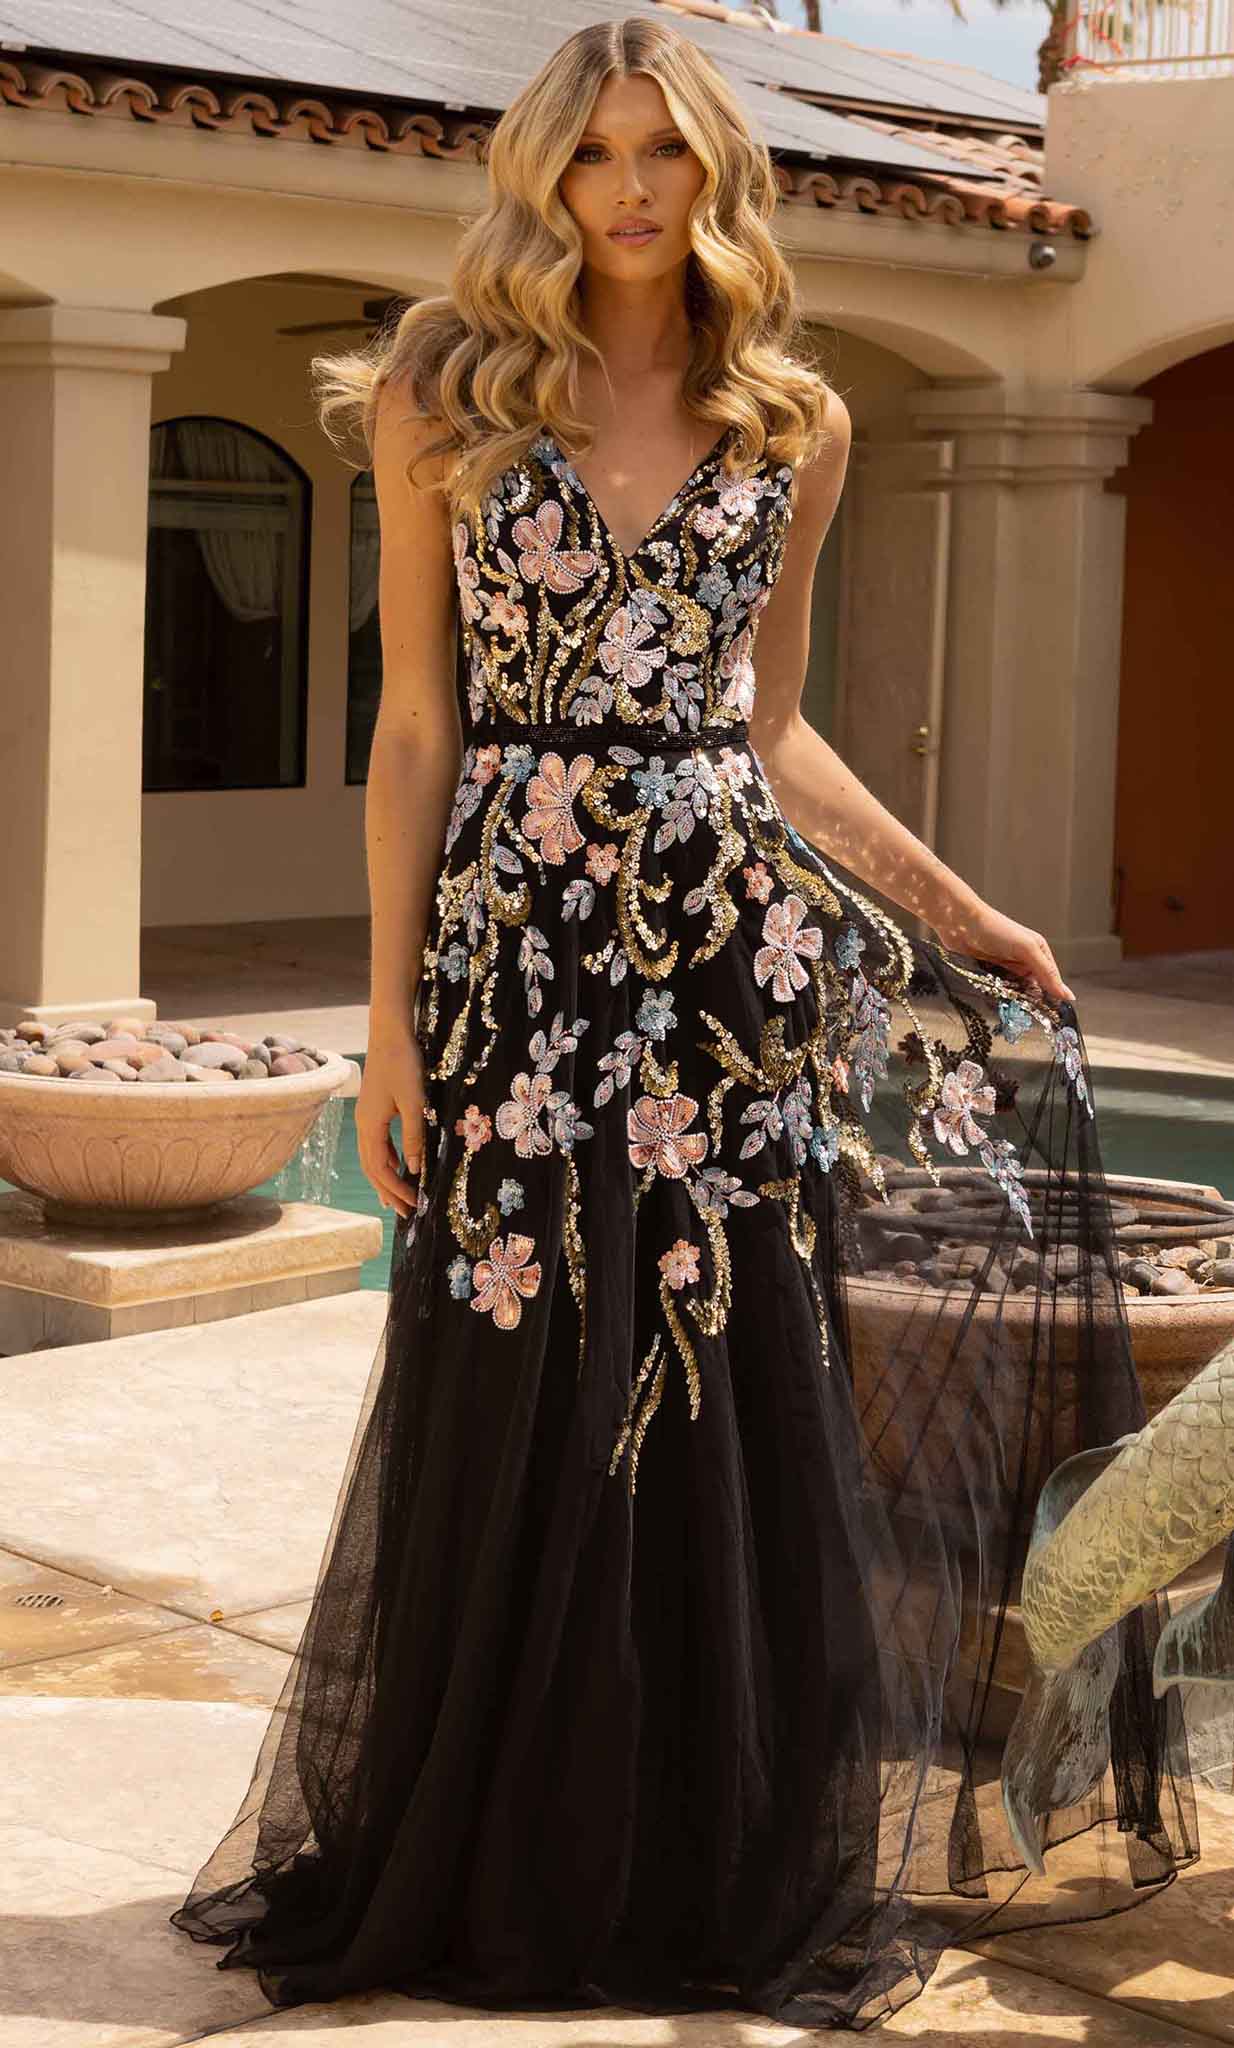 Image of Primavera Couture 3929 - Floral Patterned Embellished Tulle Gown